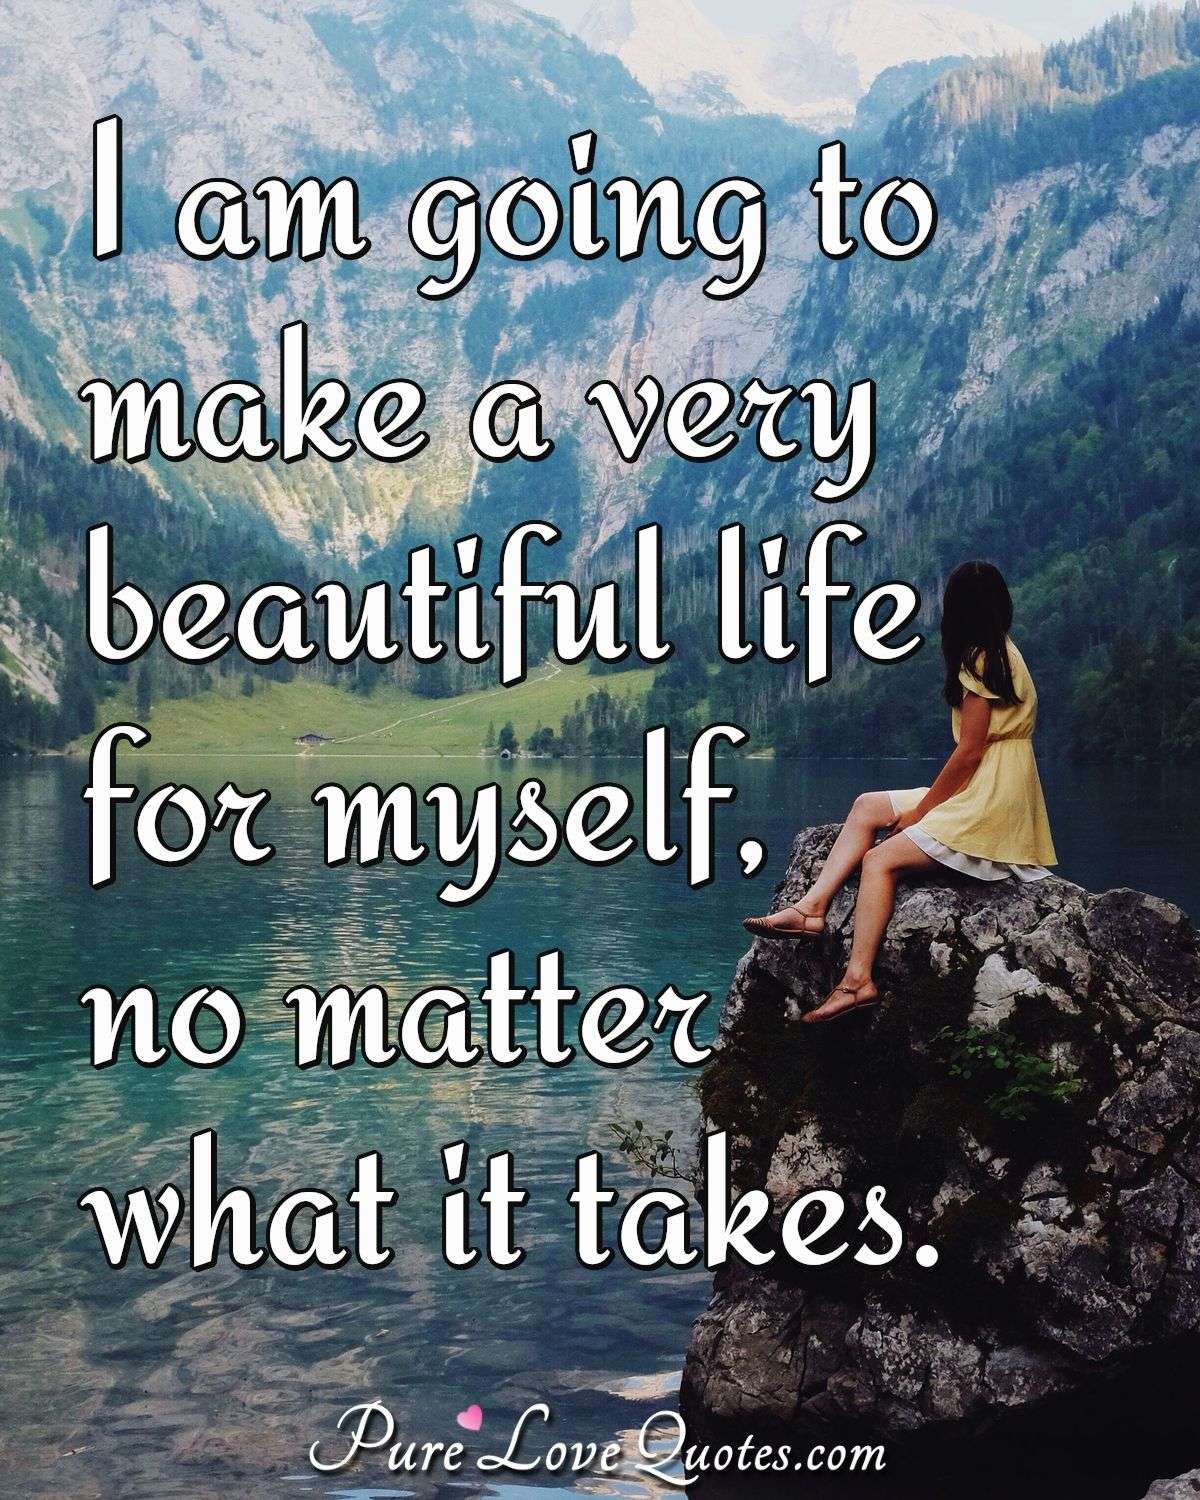 I am going to make a very beautiful life for myself no matter what it takes. - Anonymous